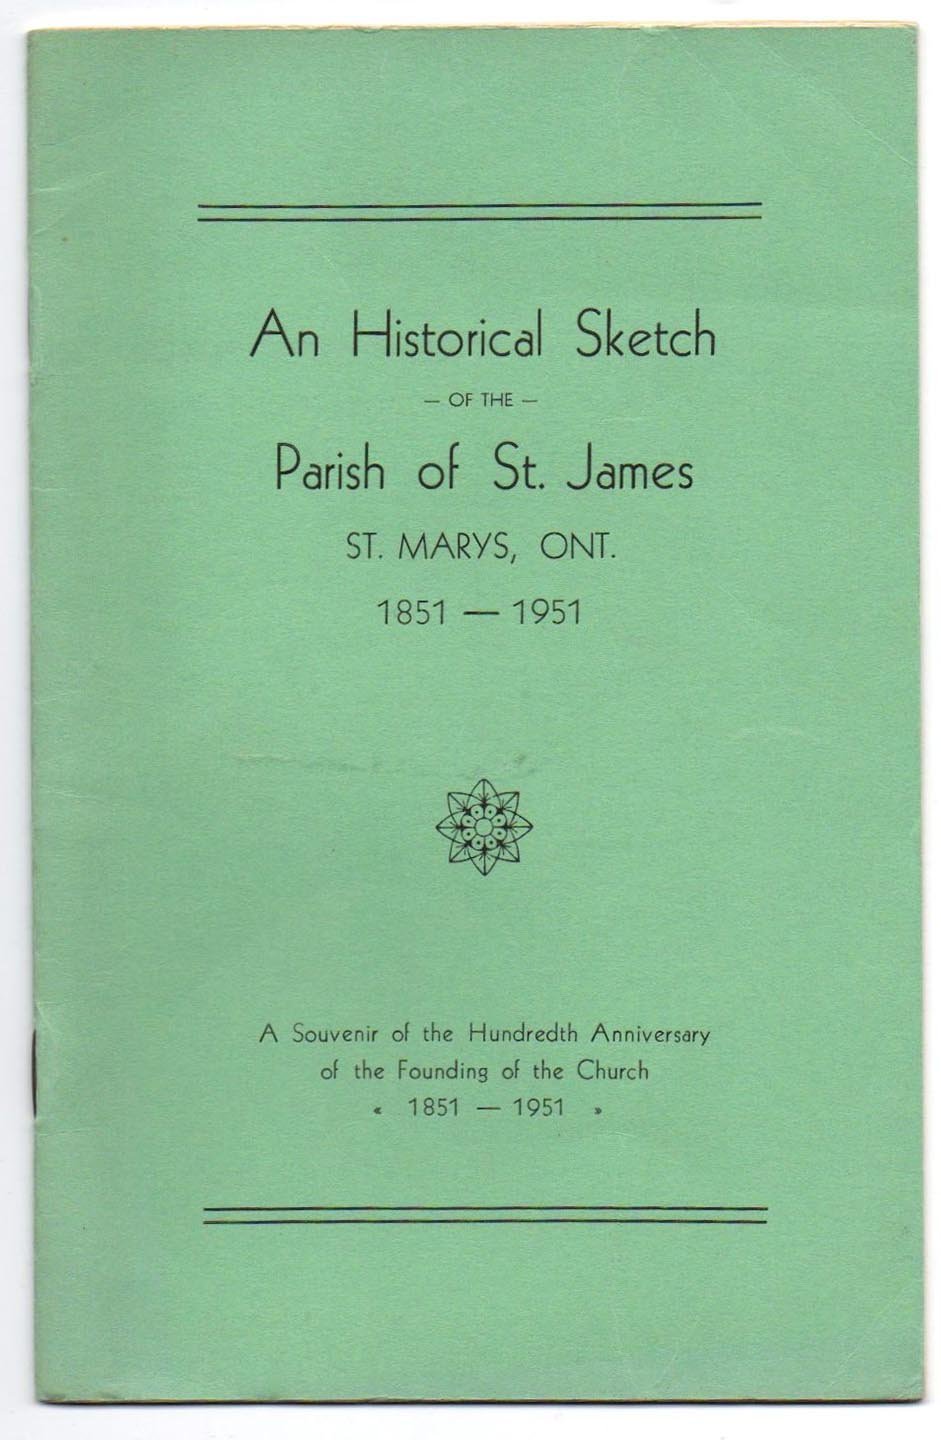 An Historical Sketch of the Parish of St. James St. Marys, Ont. 1851-1951